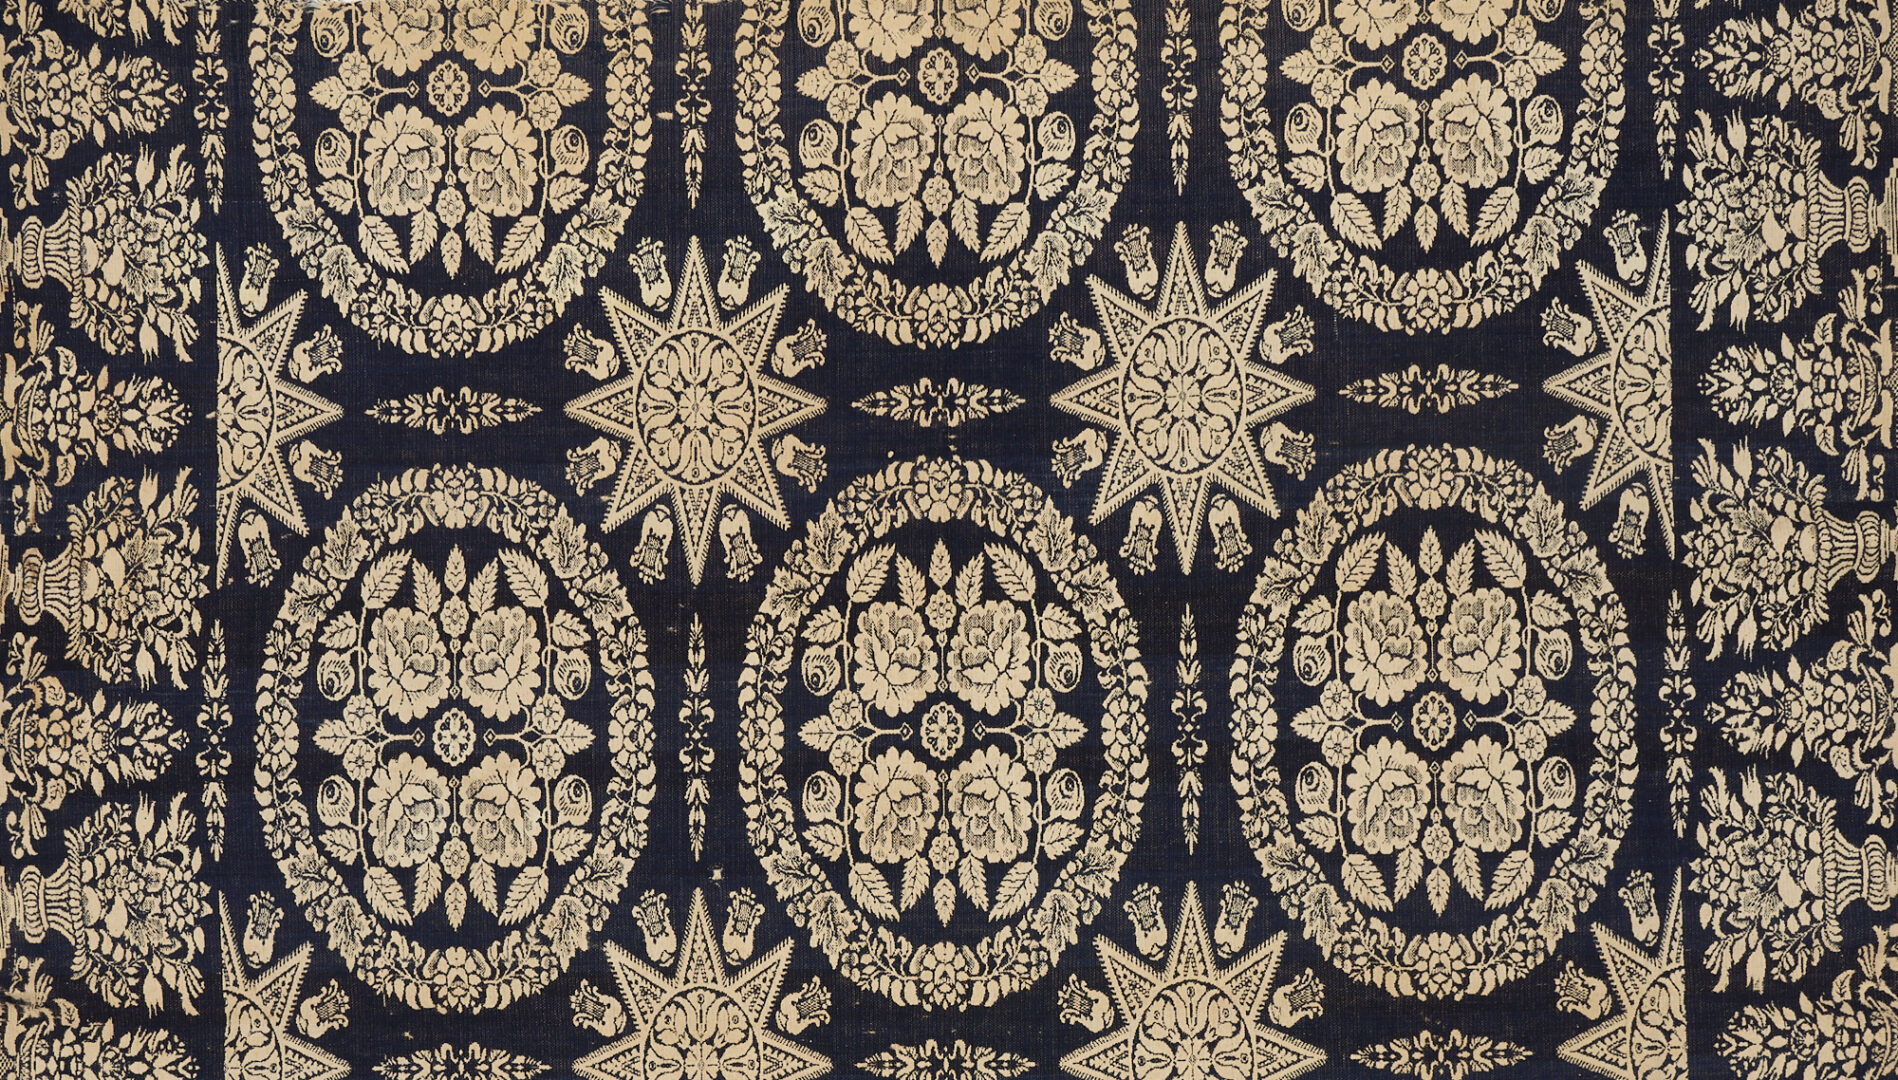 Lot 199: Kentucky Jacquard Coverlet by Dennis Cosley, 1860